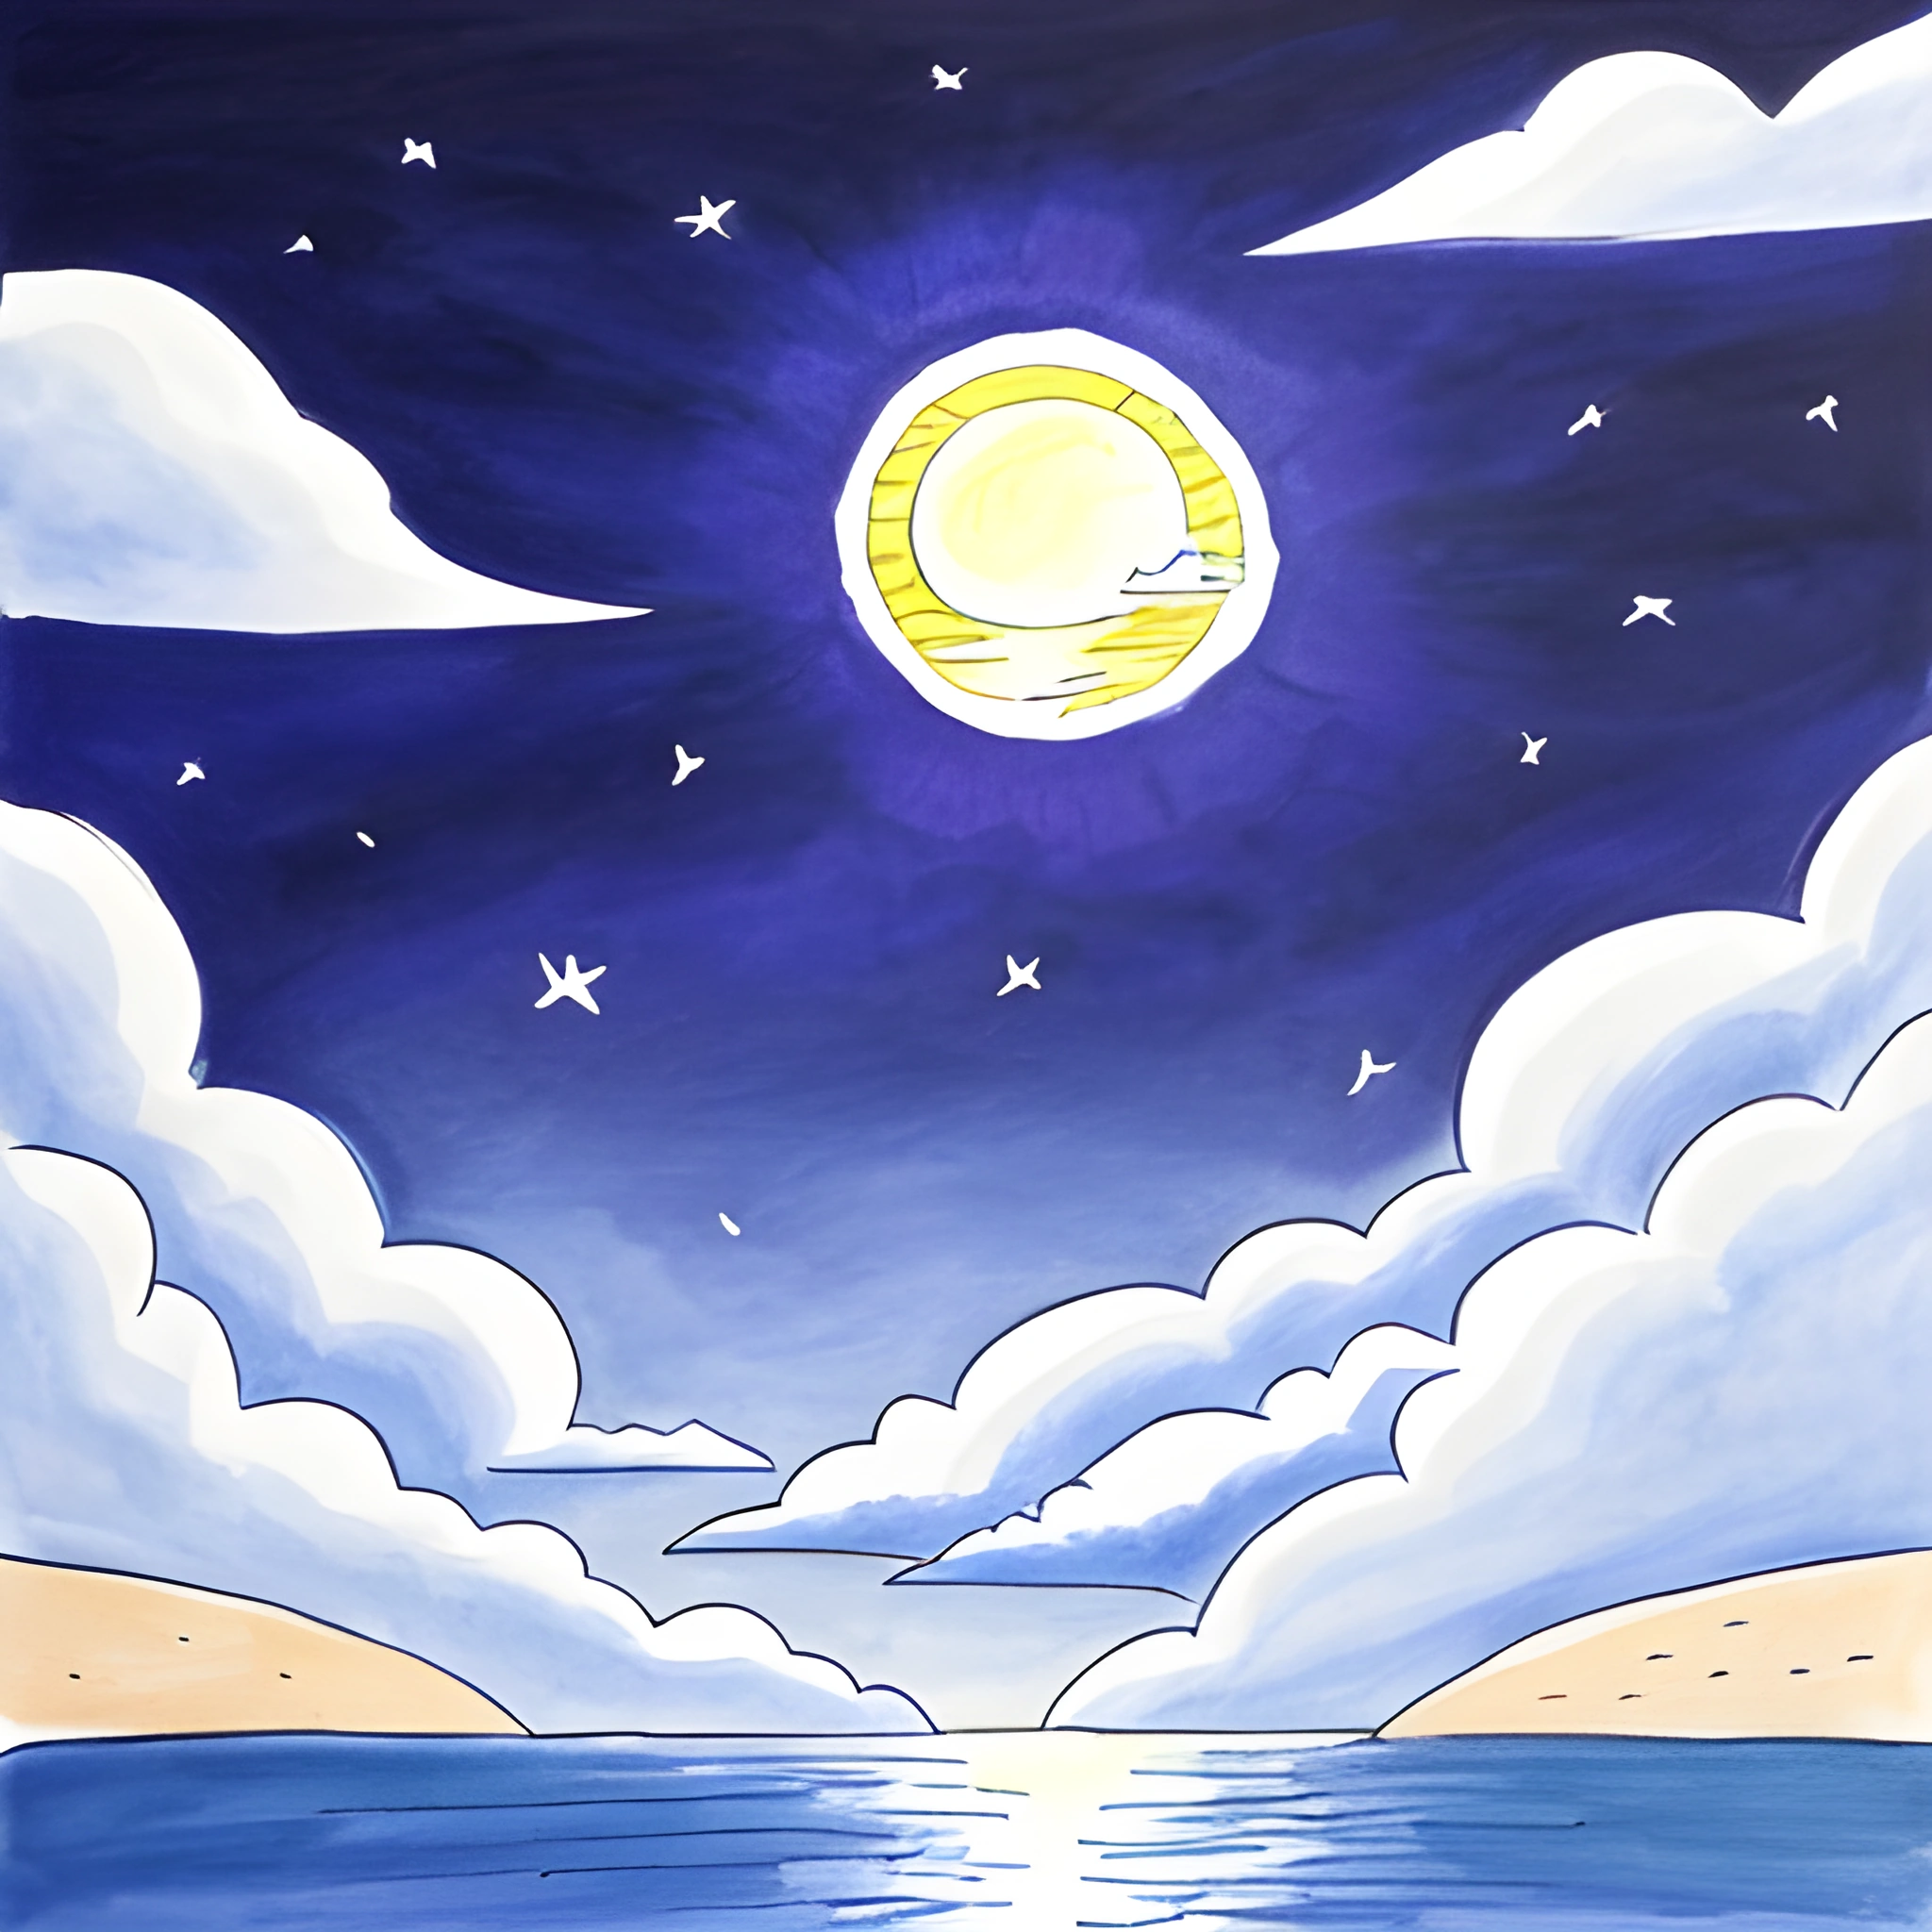 painting of a beach scene with a full moon and clouds